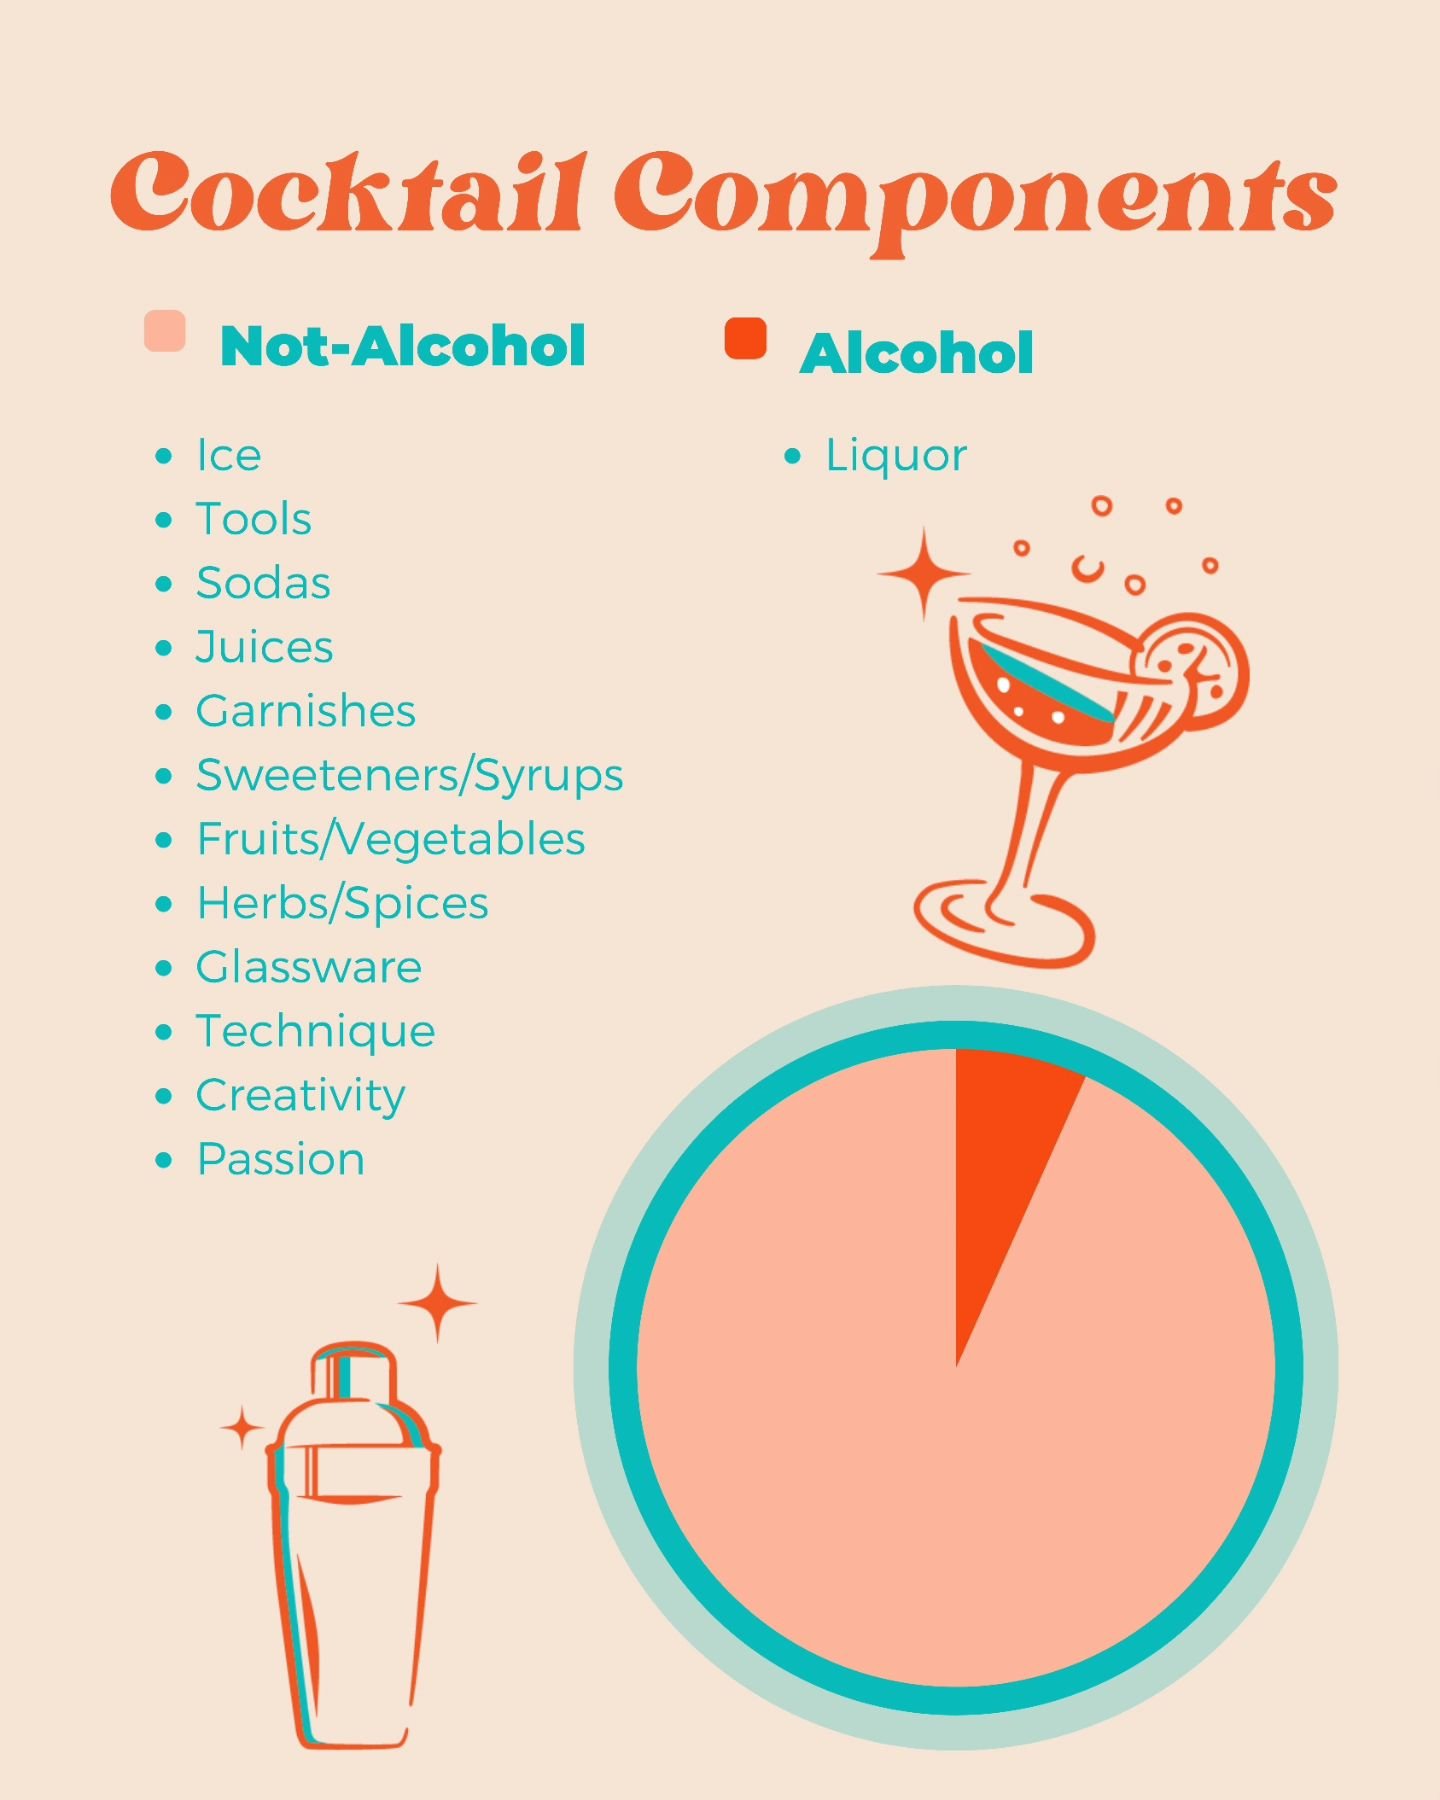 Celebrate the diverse world of mixology with us this National Cocktail Day! 🍹✨ 

Our chart reveals the vast palette of ingredients that go into crafting the perfect cocktail, showing that alcohol is just one of many 🎨

At Refind, we embrace this di